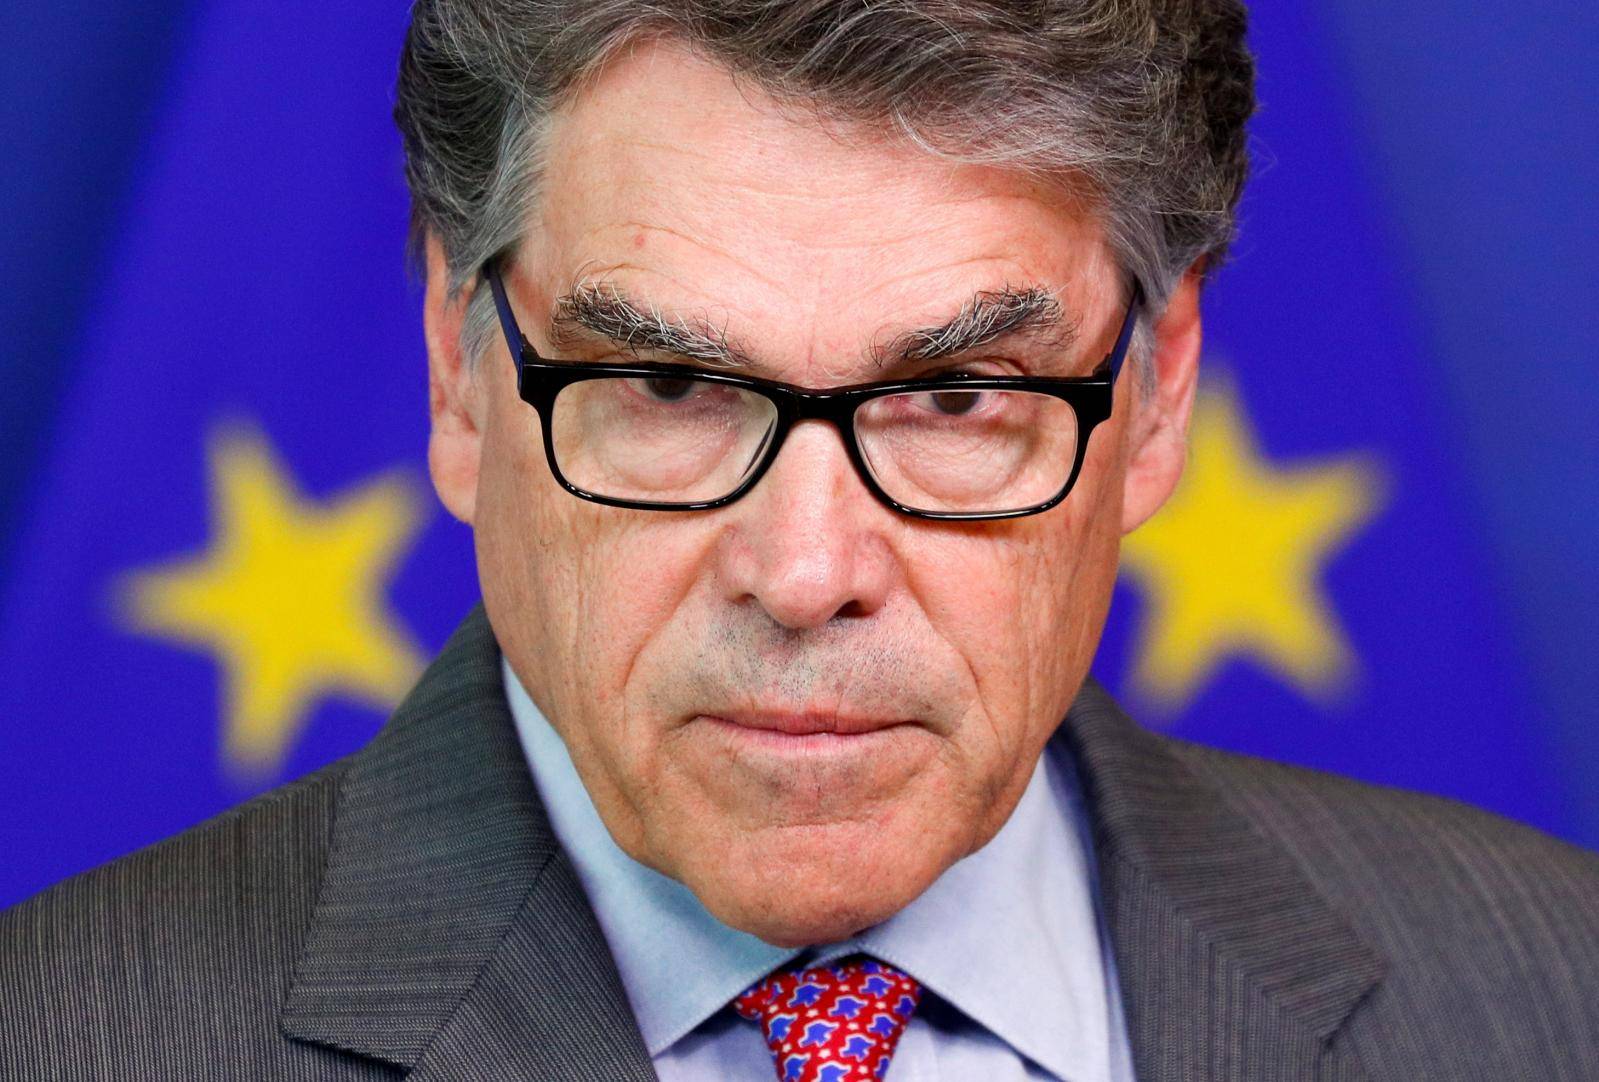 FILE PHOTO: U.S. Energy Secretary Perry speaks during a joint news conference with EU Energy Commissioner Canete in Brussels